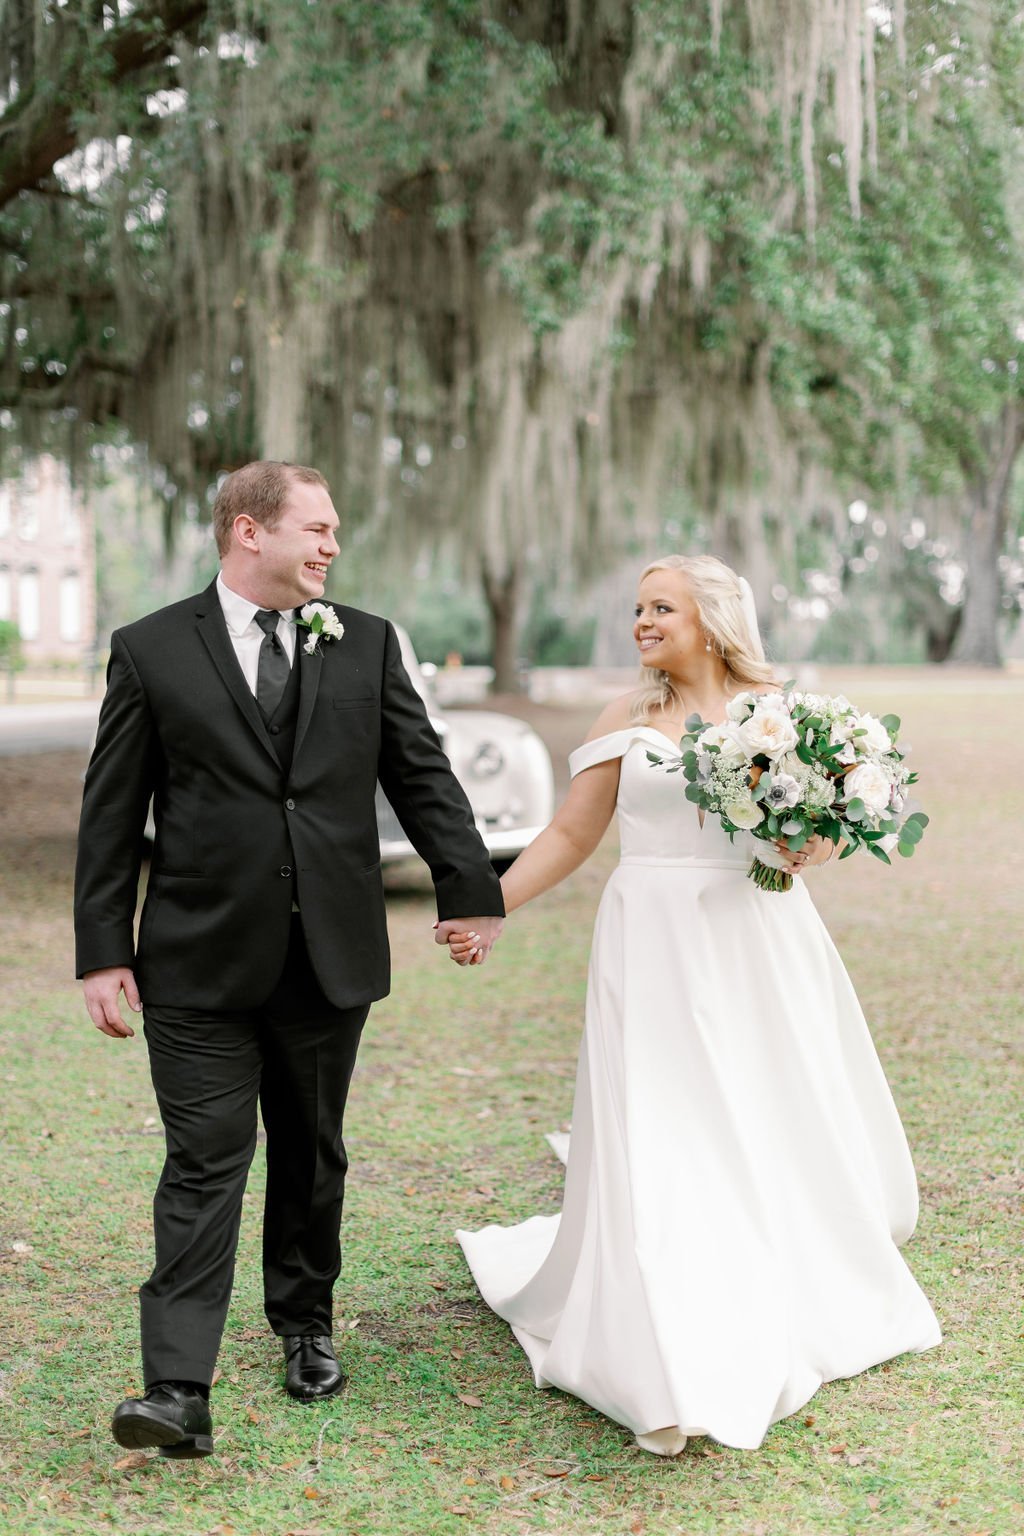 Rachel-and-matthews-elegant-savannah-wedding-at-whitefield-chapel-and-vics-on-the-river-featuring-ivory-and-beau-florals-planned-by-savannah-wedding-planner-ivory-and-beau-savannah-florist-savannah-wedding-florist-savannah-wedding-10.jpg